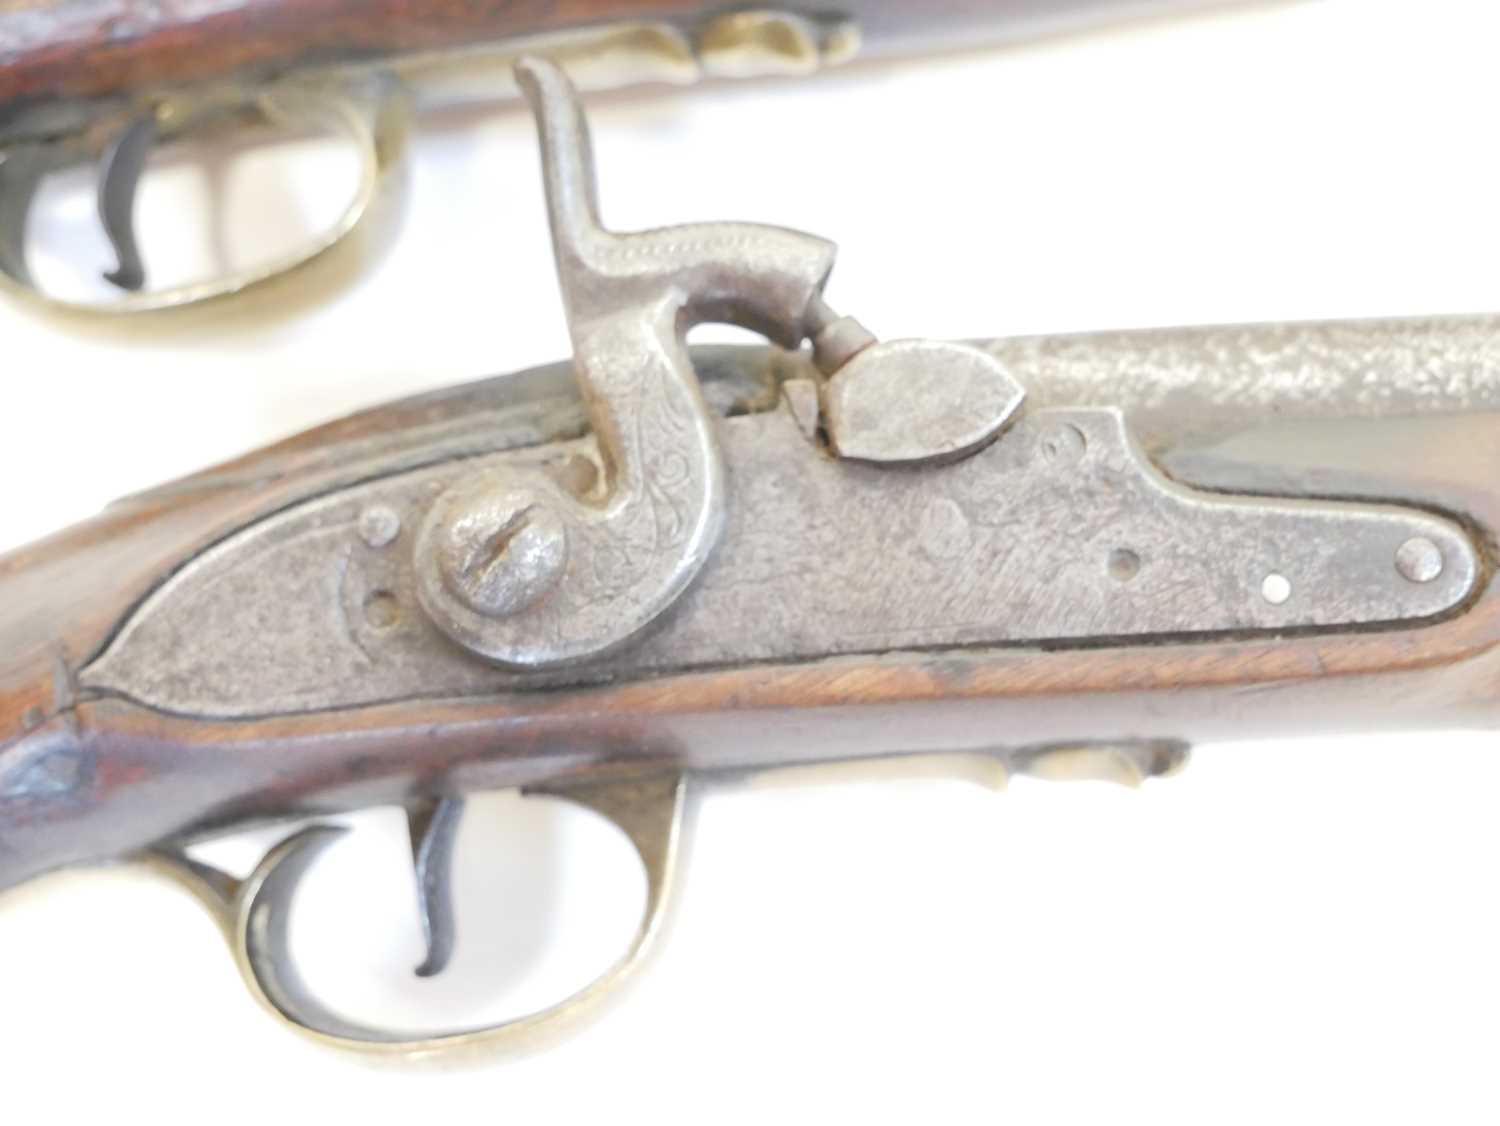 Matched together pair of percussion pistols - Image 10 of 11